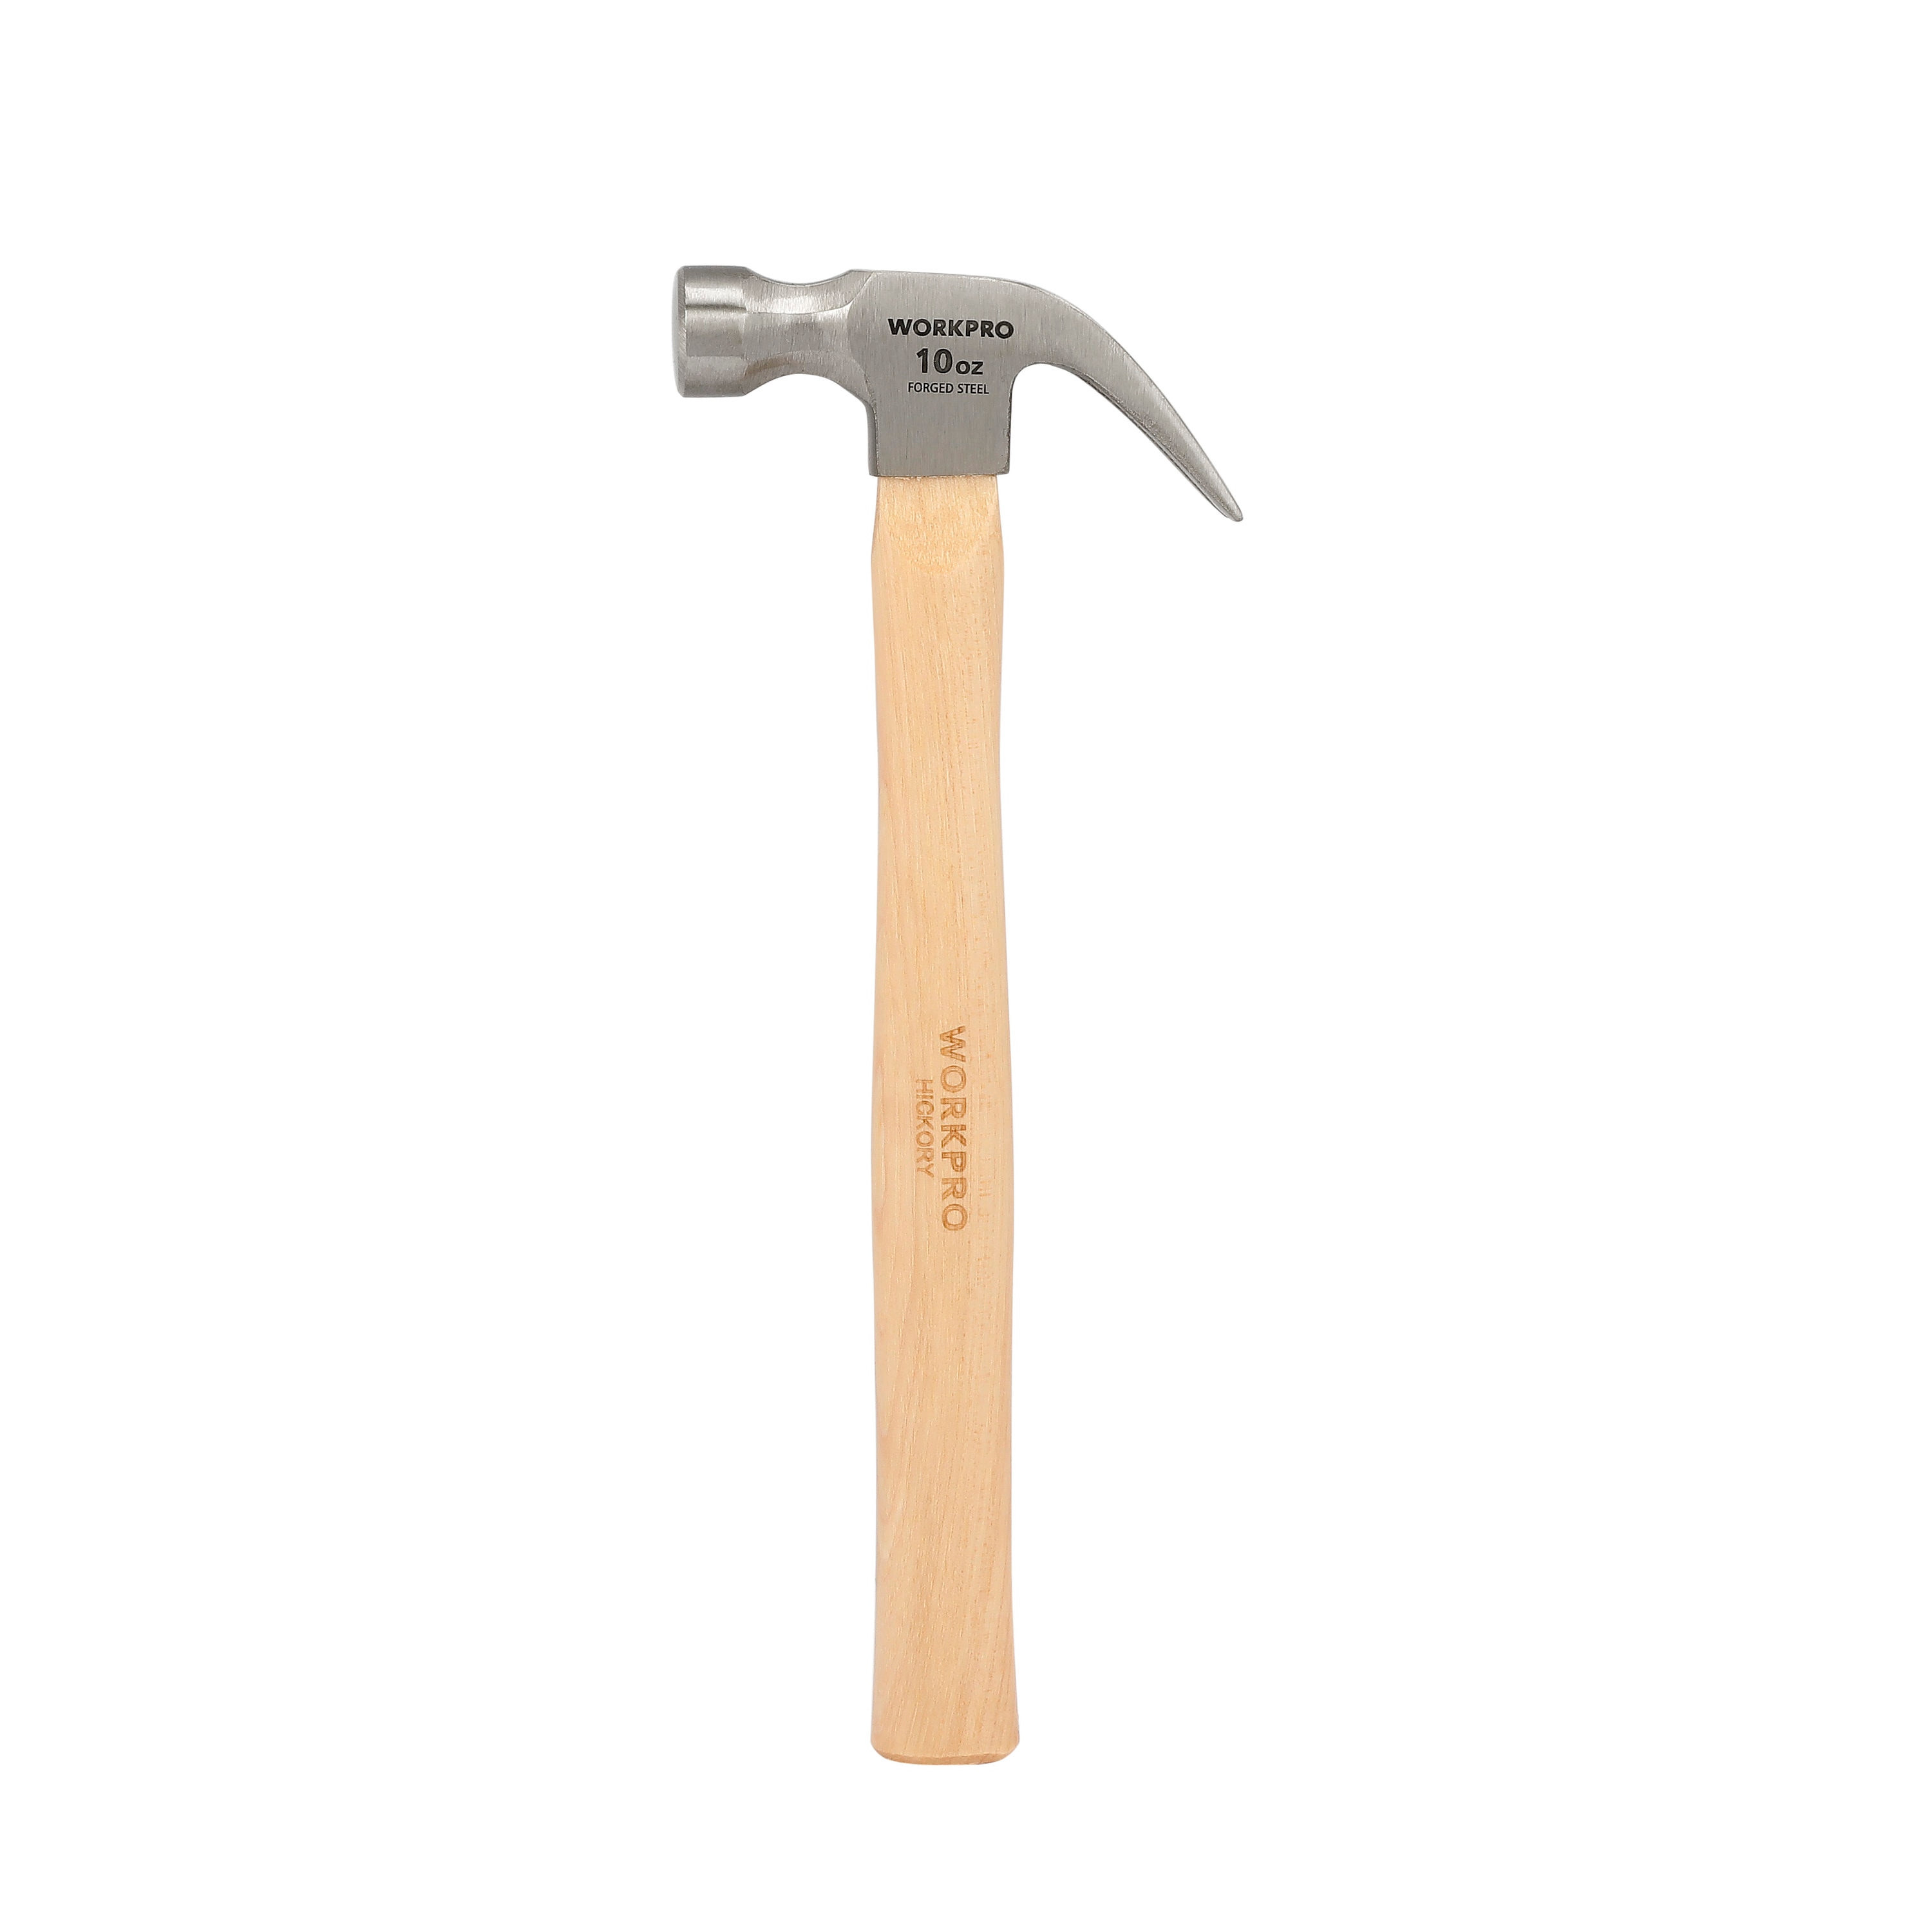 WORKPRO 10-oz Smooth Face Steel Head Wood Claw Hammer in the